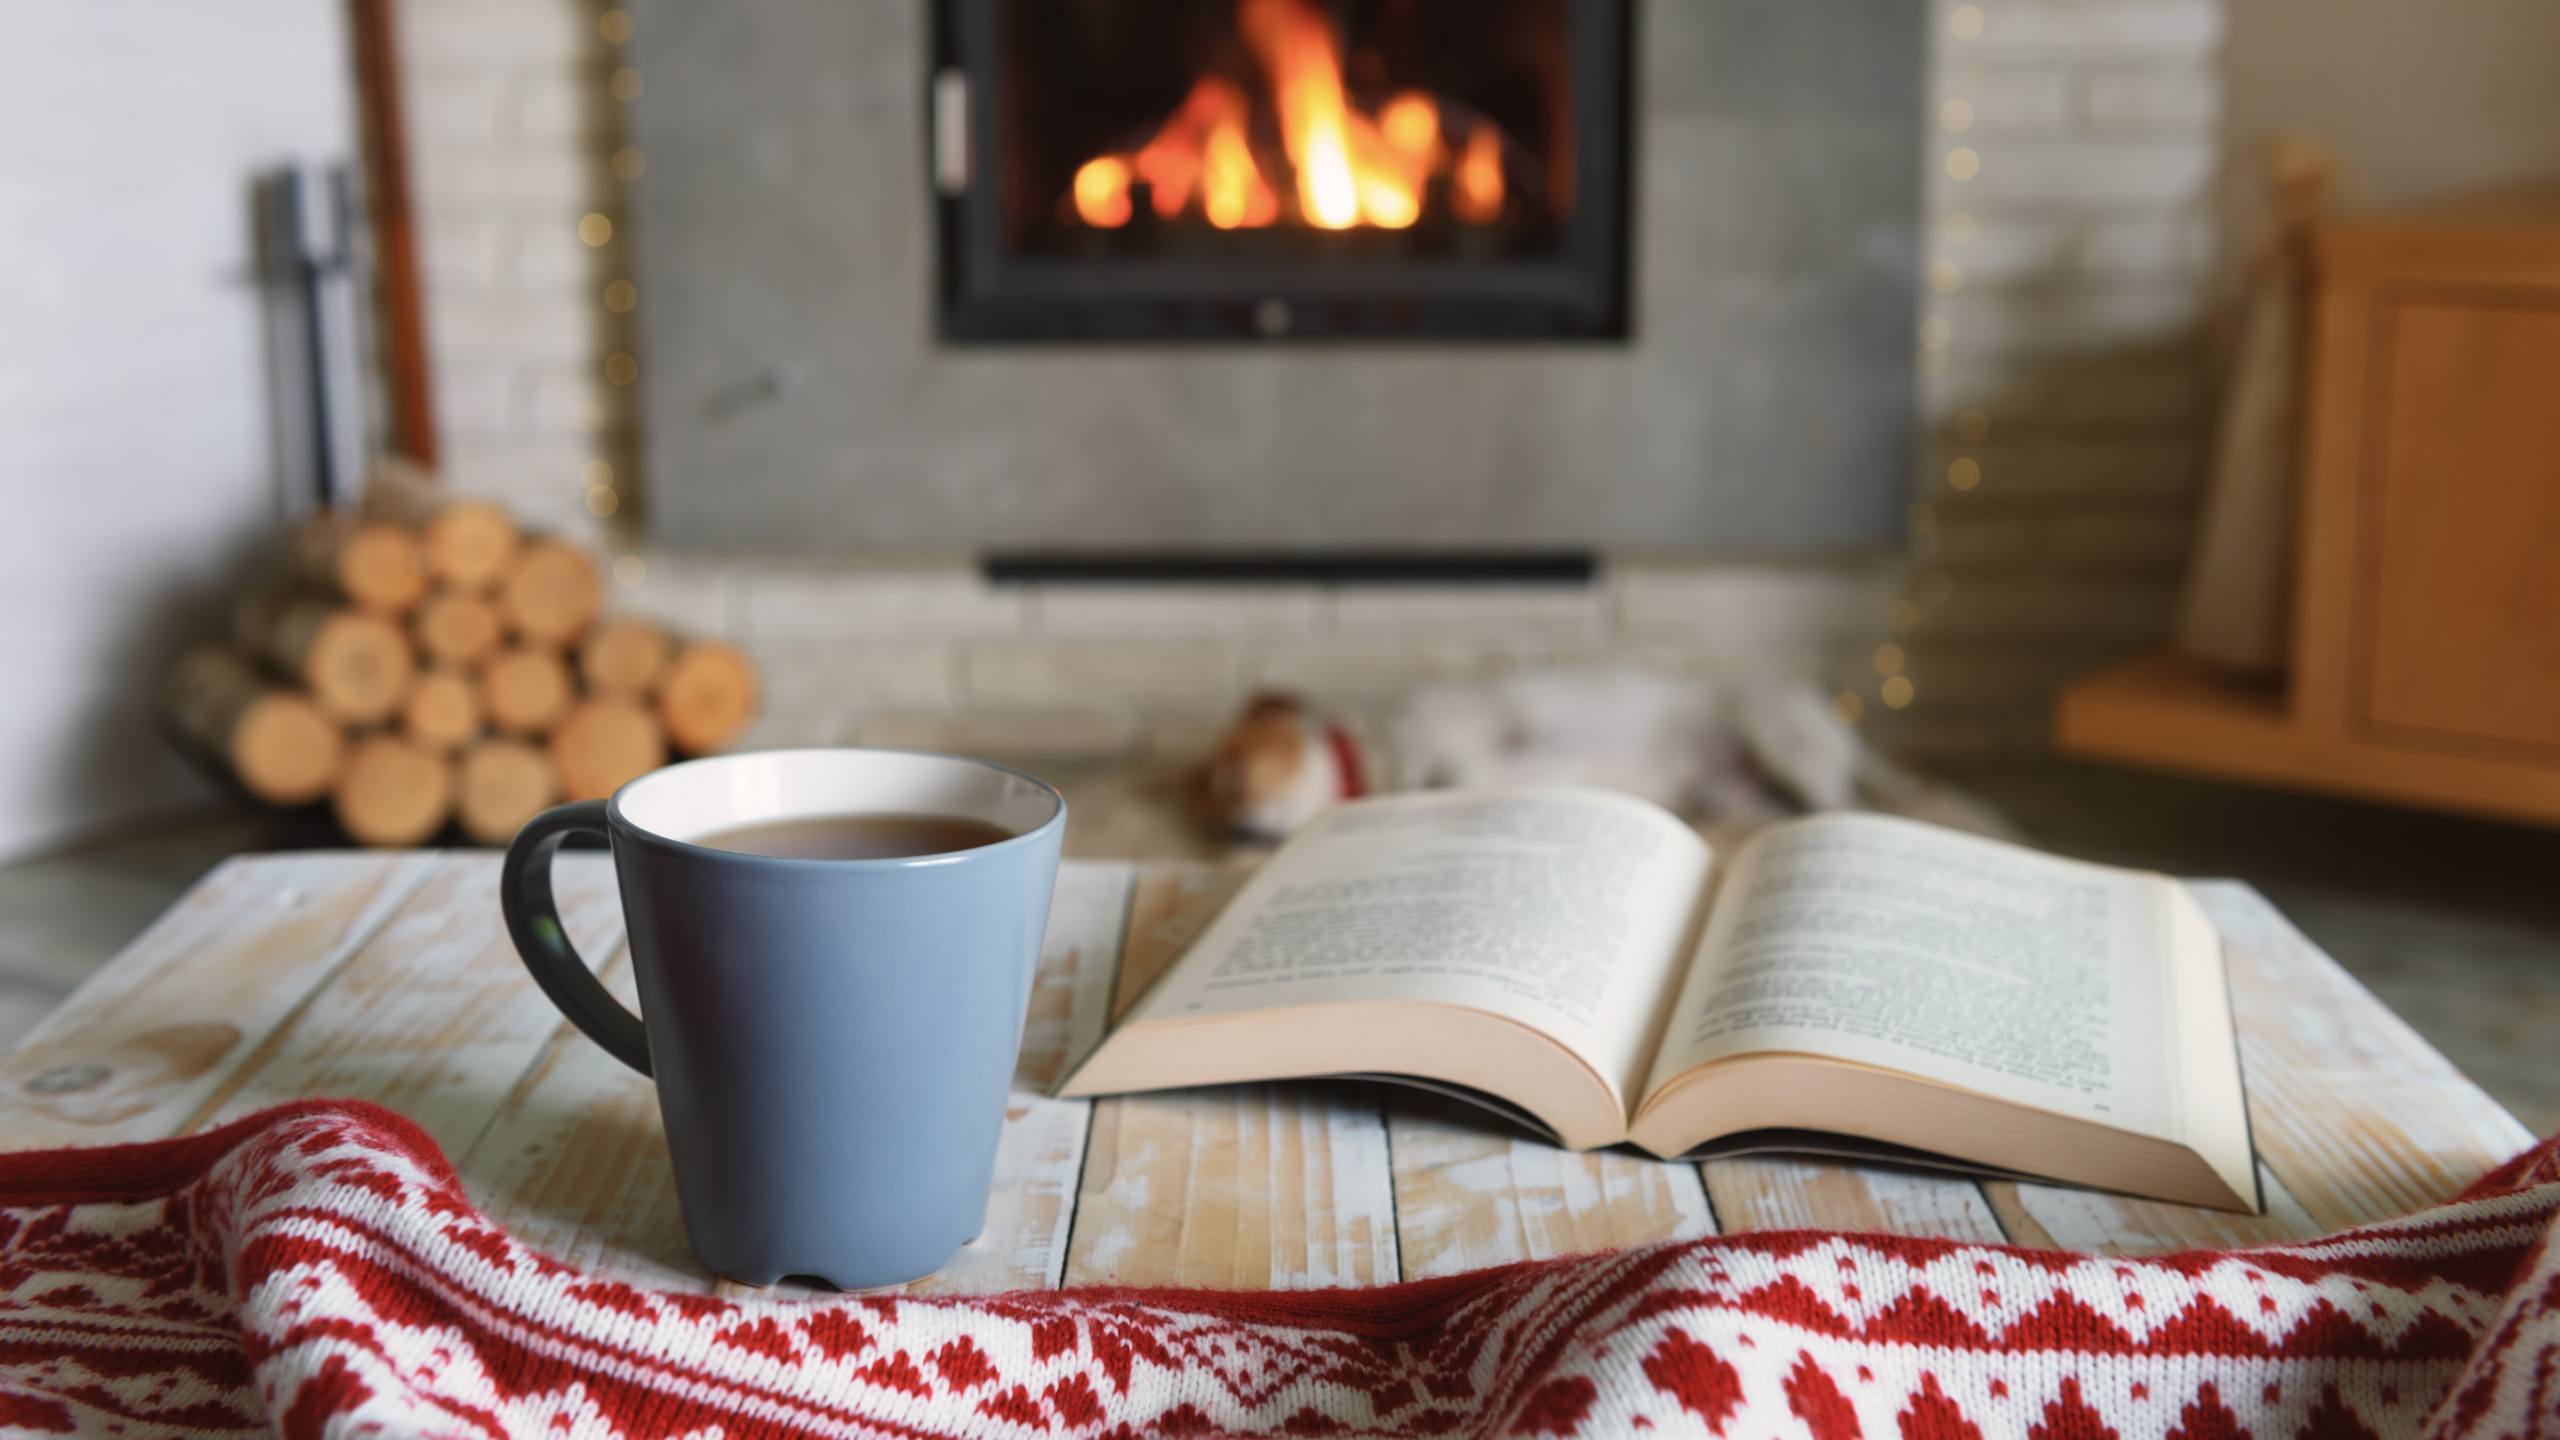 Blanket, cup of tea and open book on a wooden table, in a room with a lit fireplace.